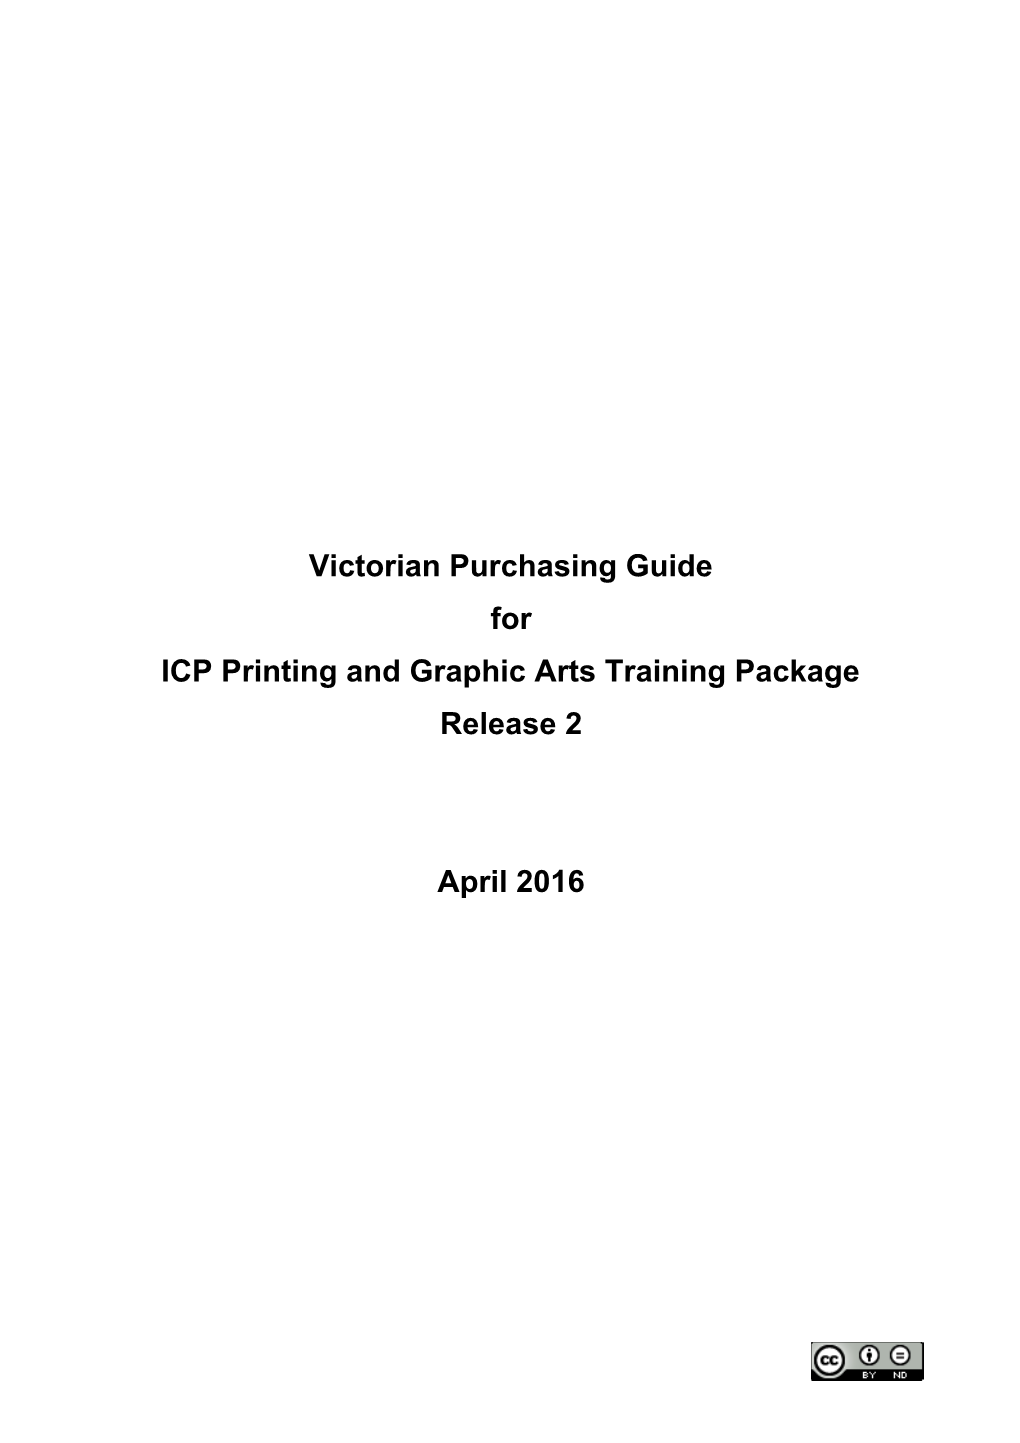 Victorian Purchasing Guide for ICP Printing